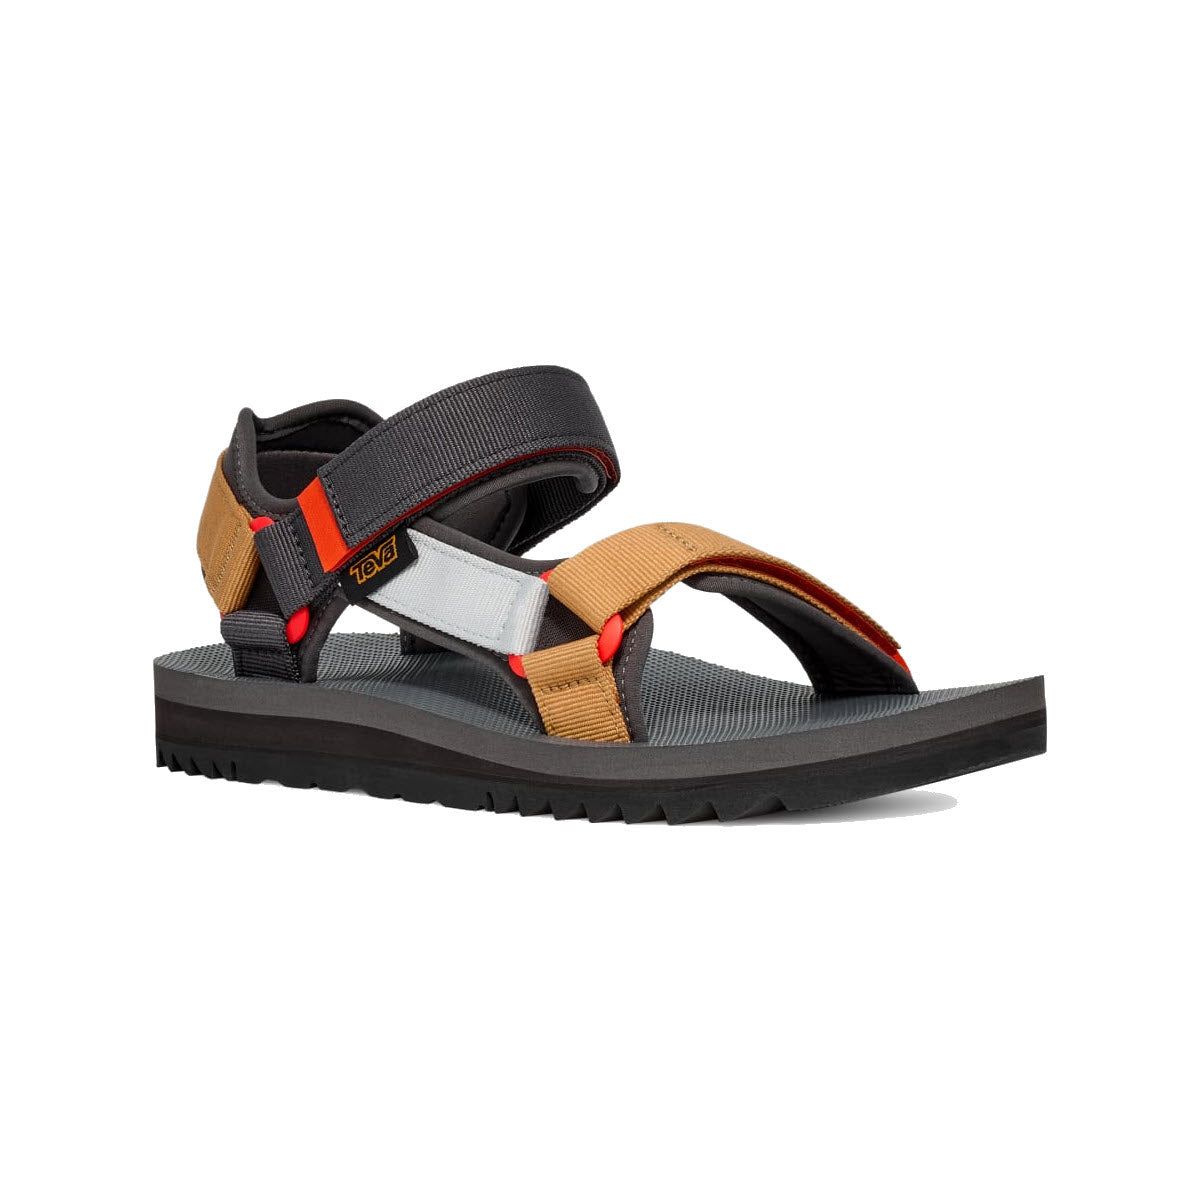 A pair of TEVA UNIVERSAL TRAIL SANDAL OBSIDIAN MULTI - MENS sandals featuring multiple REPREVE® recycled polyester straps in shades of gray, beige, and orange, with a rugged black Vibram® Megagrip outsole.